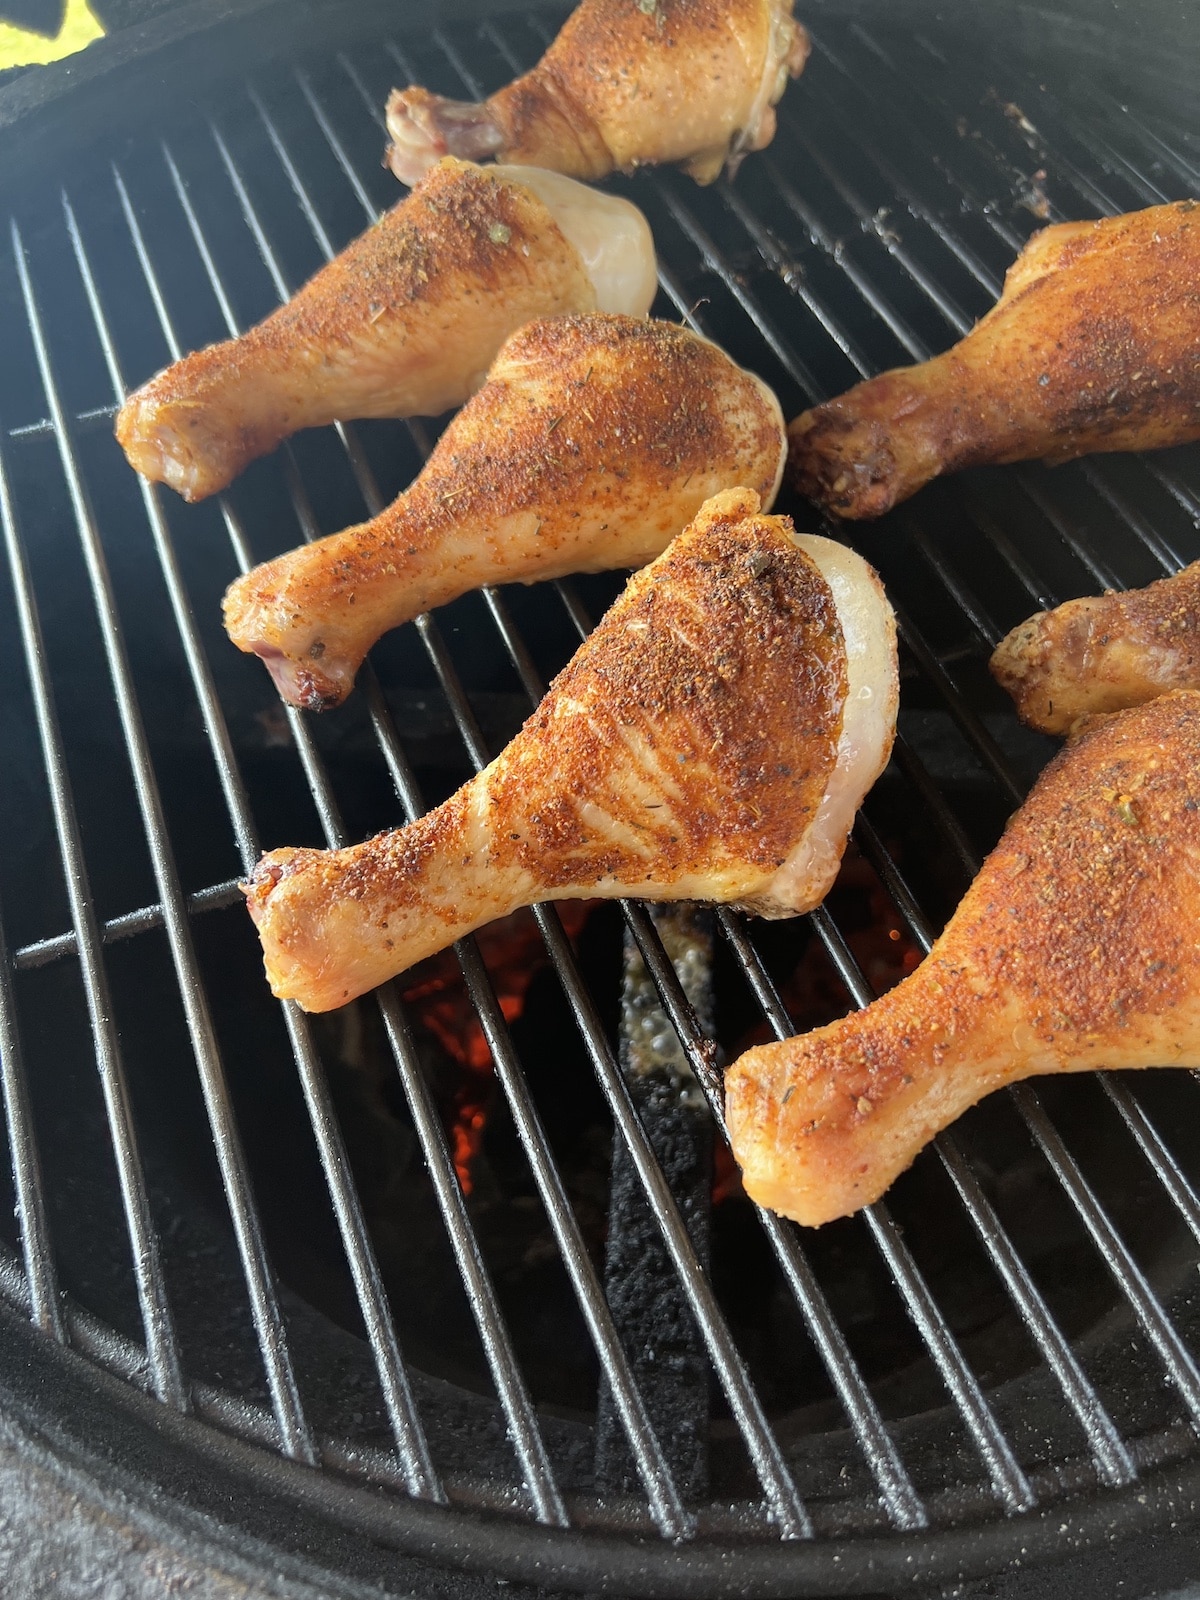 Smoked Drumsticks on a grill.